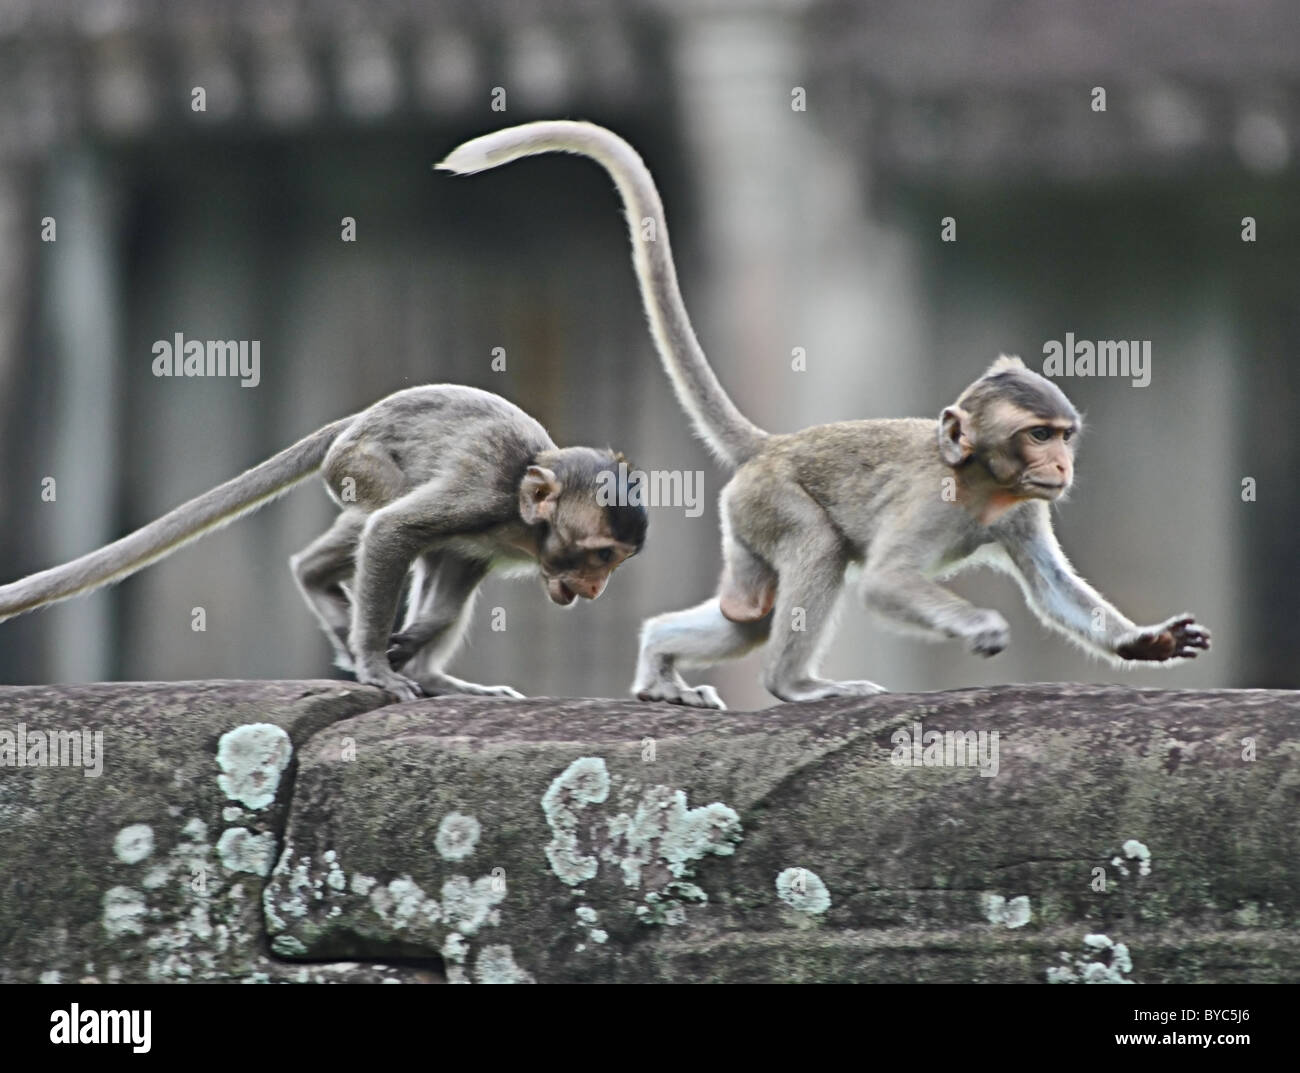 Young Rhesus macaque monkeys chasing each other at Angkor Wat, Cambodia Stock Photo